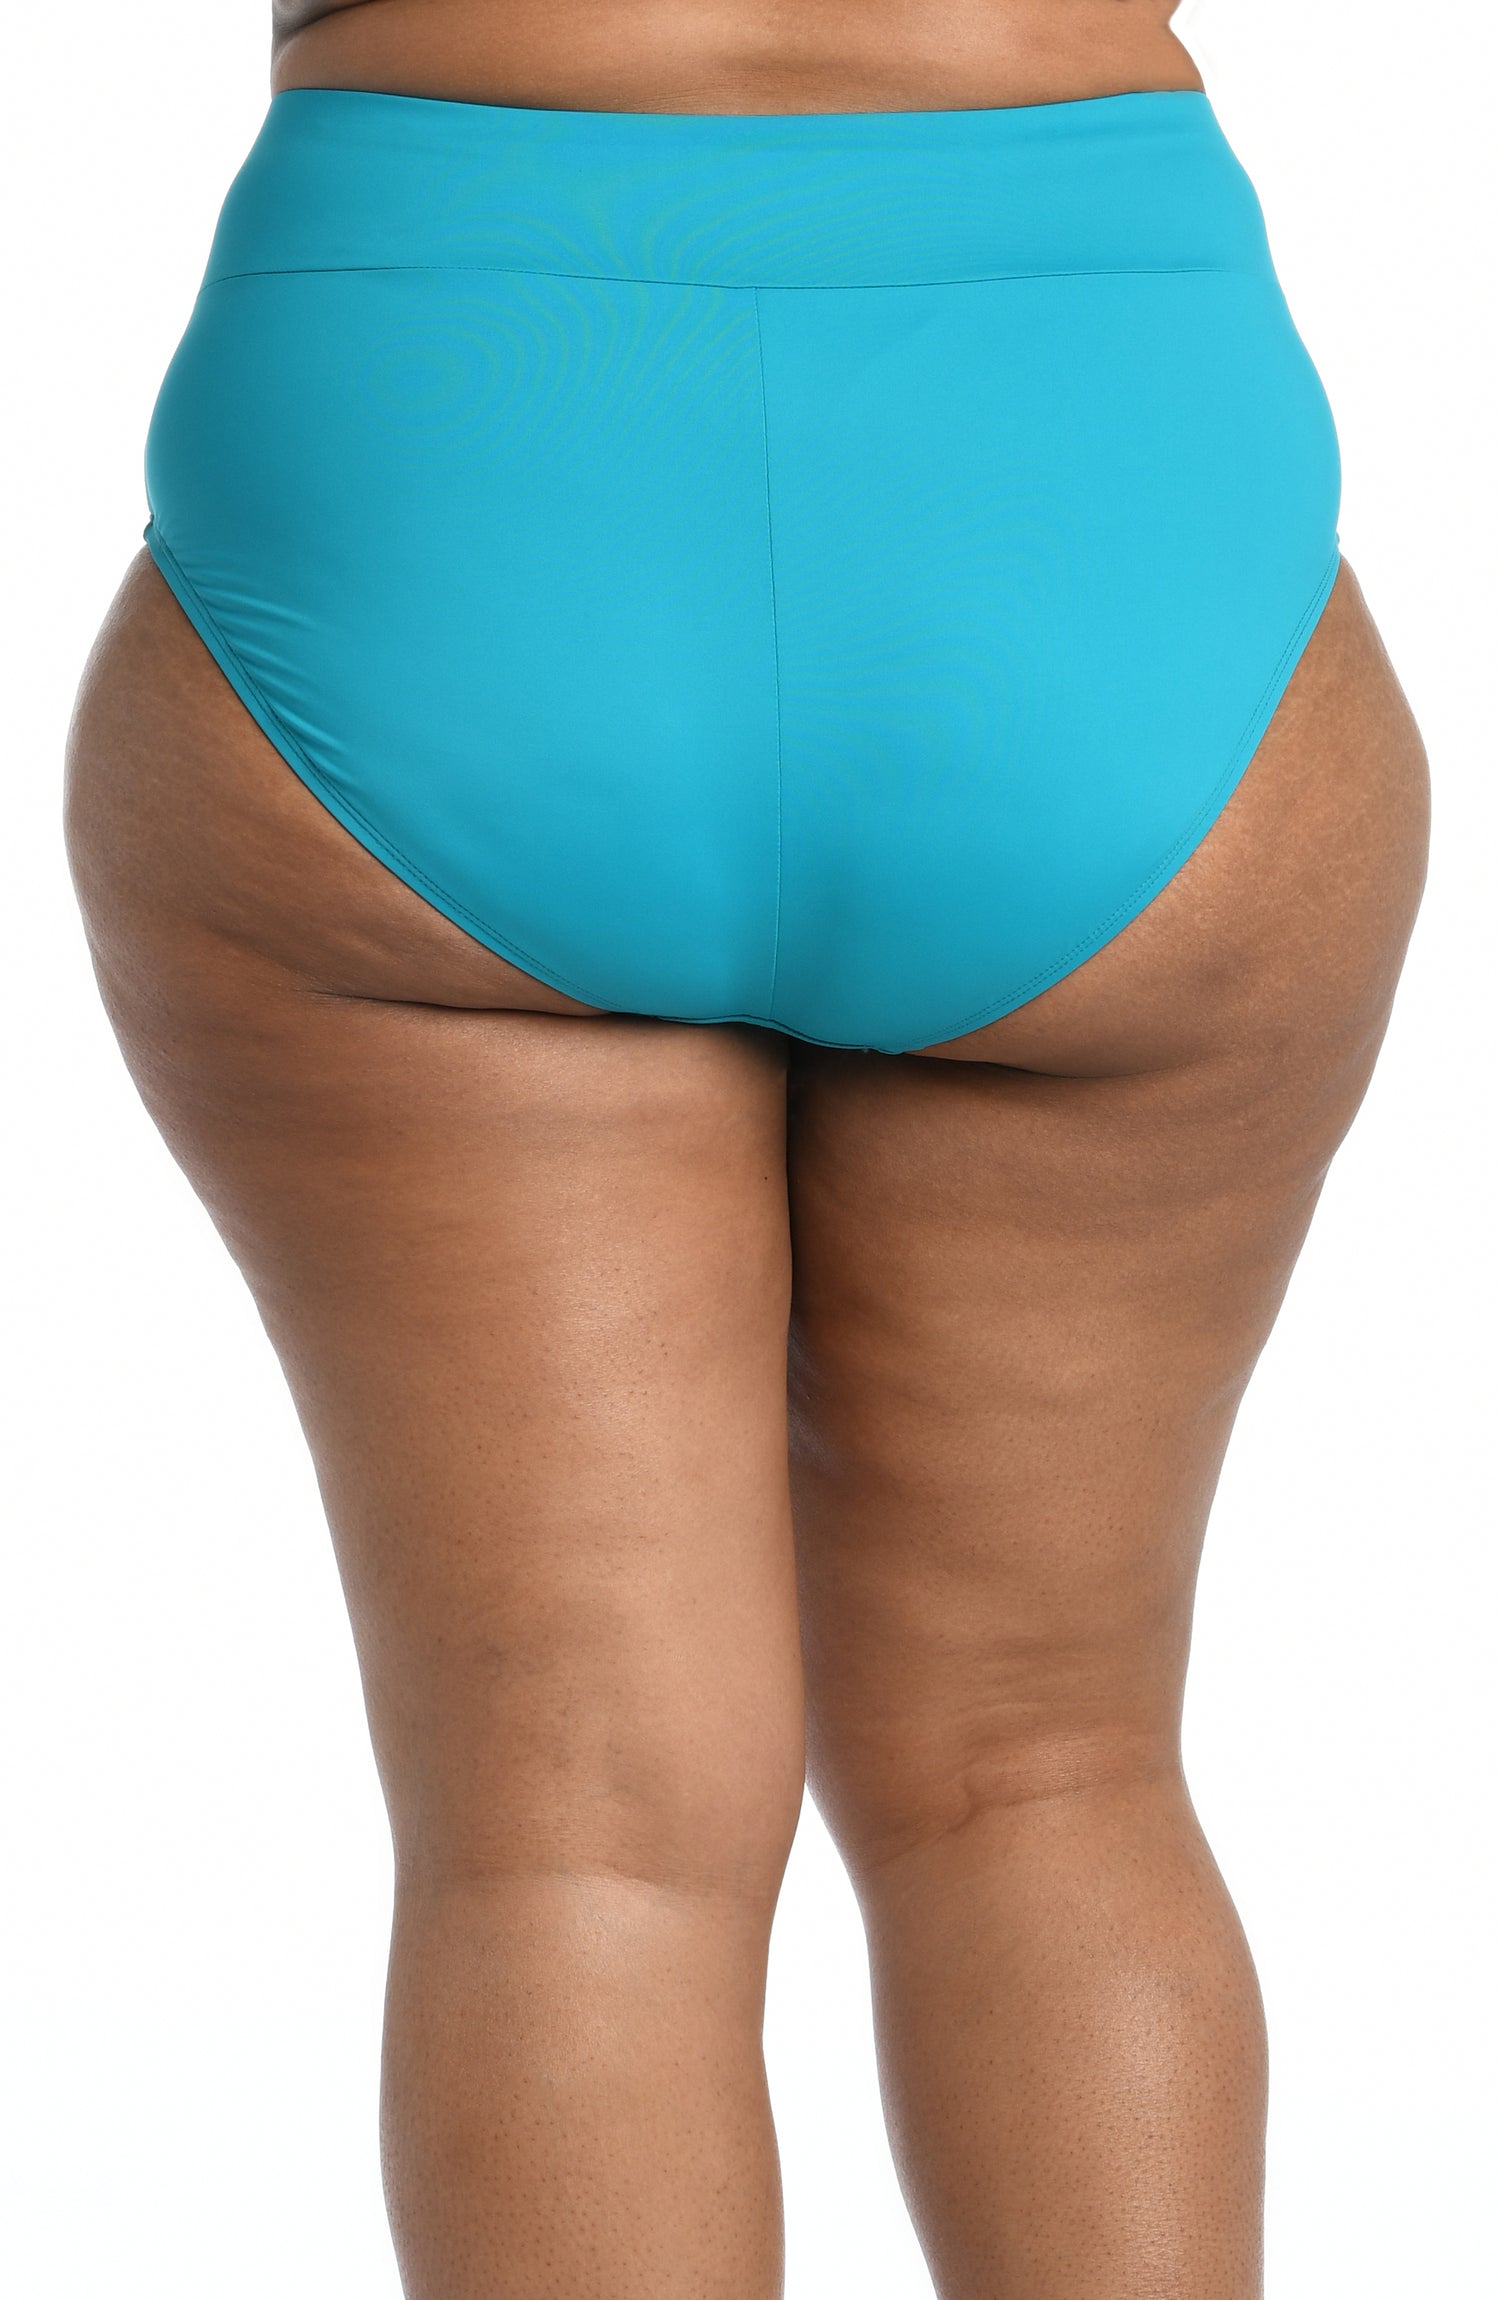 Model is wearing a turquoise colored high waist swimsuit bottom from our Best-Selling Island Goddess collection.